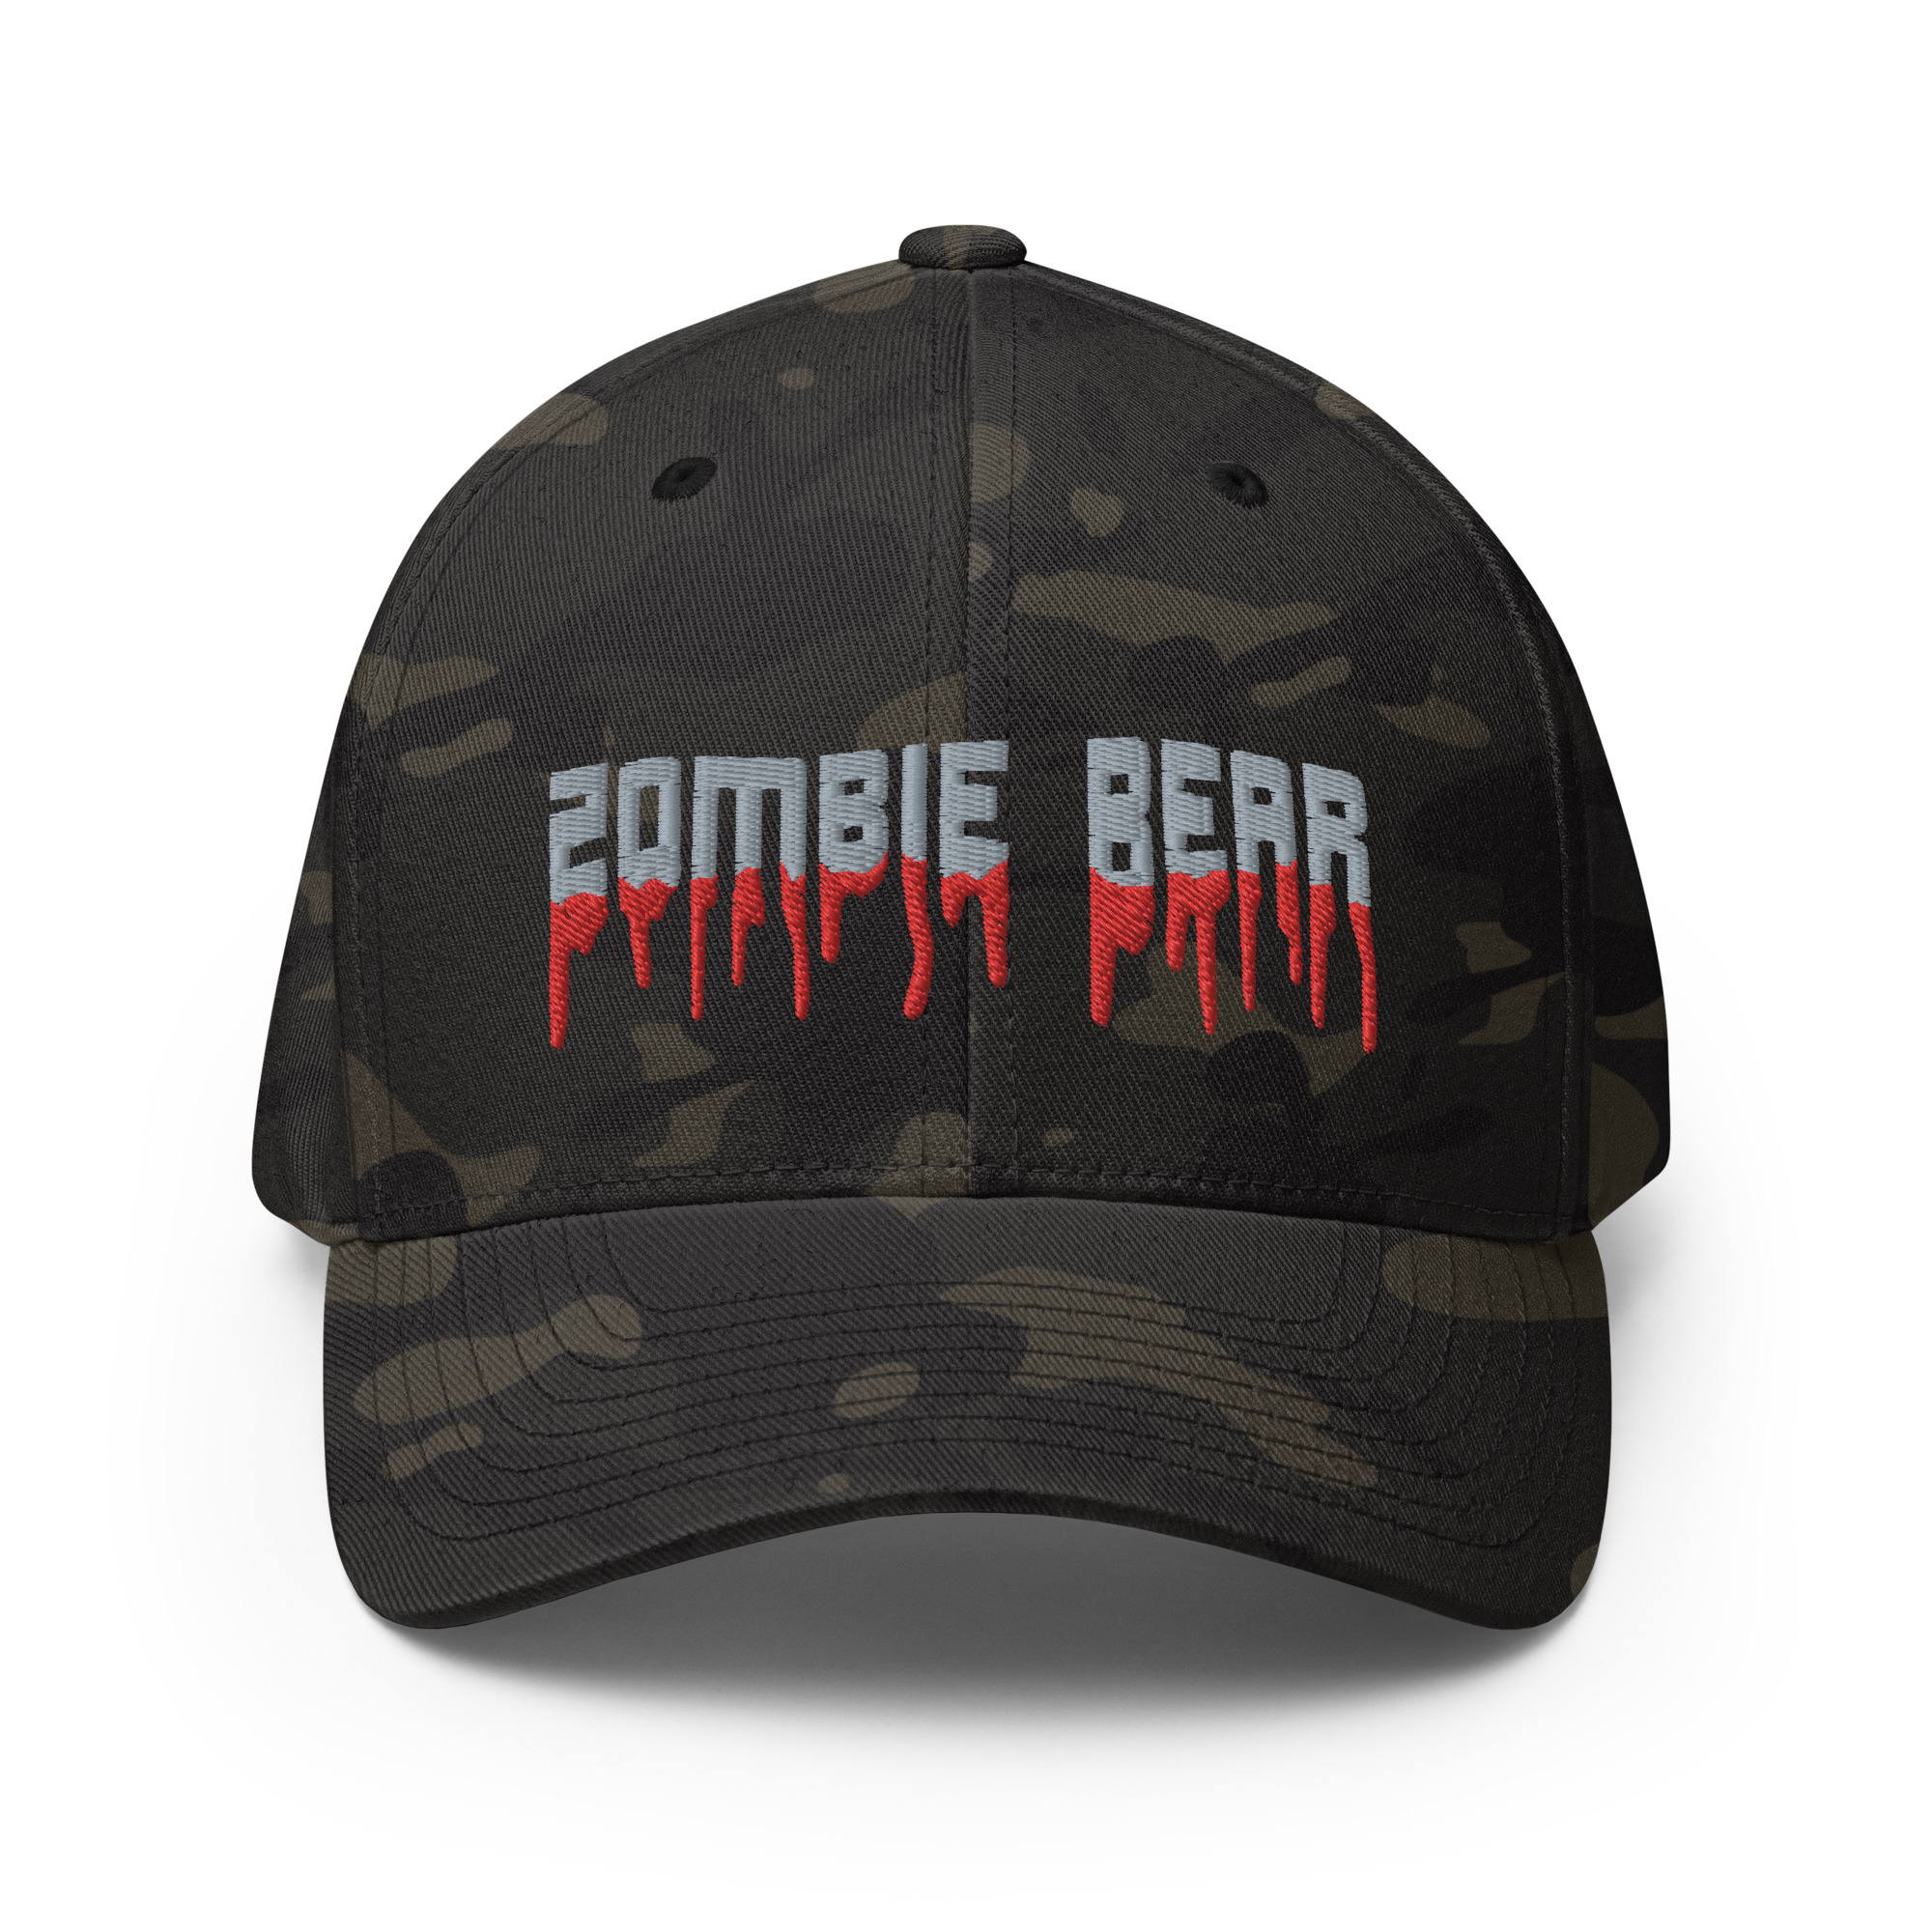 Featured image for “Zombie Bear - Structured Twill Flexfit Cap”